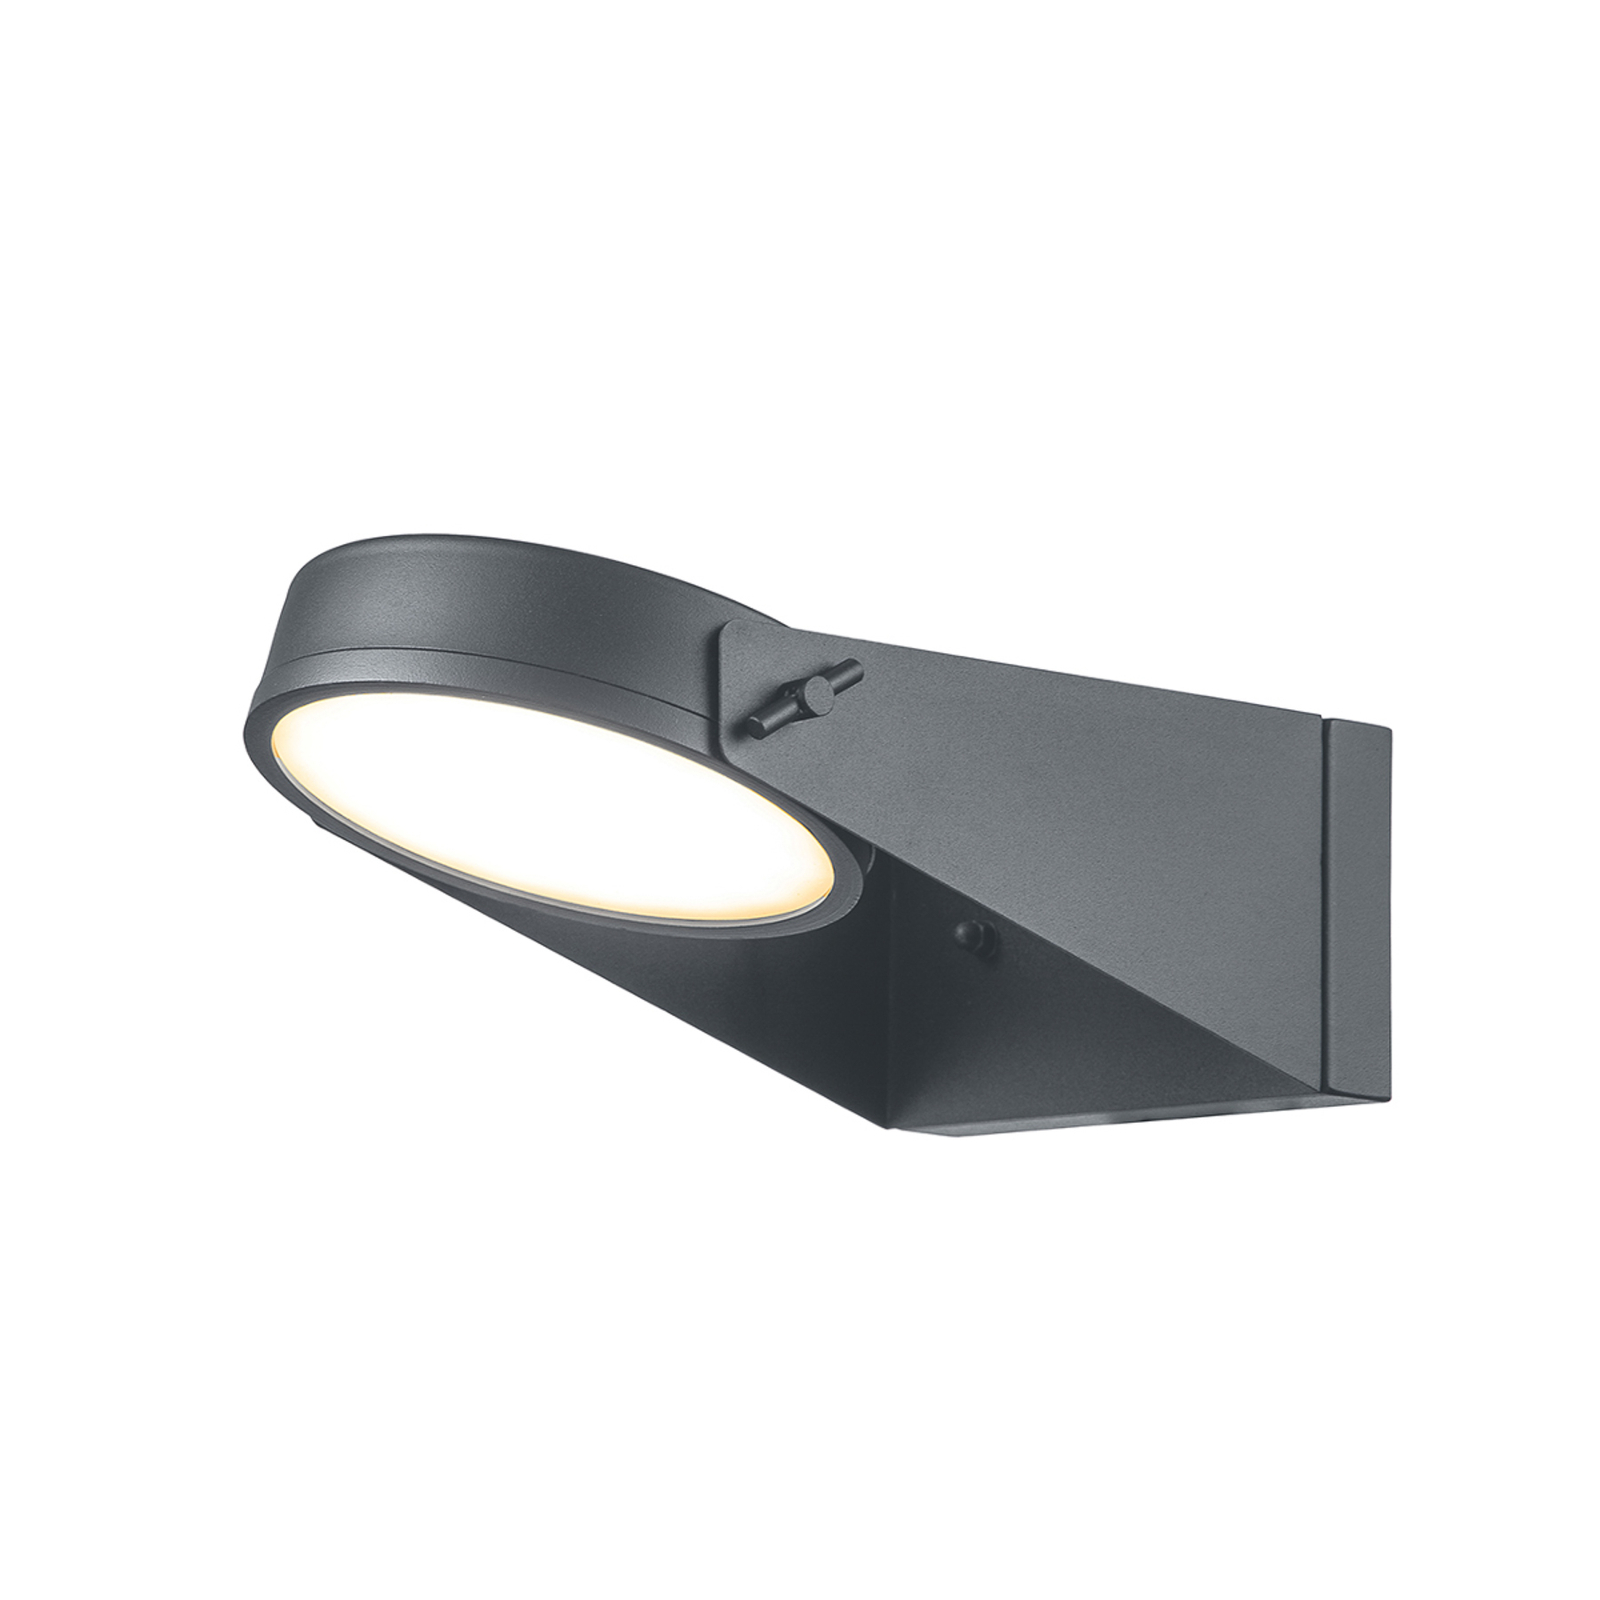 Zola LED outdoor wall light, stainless steel grey